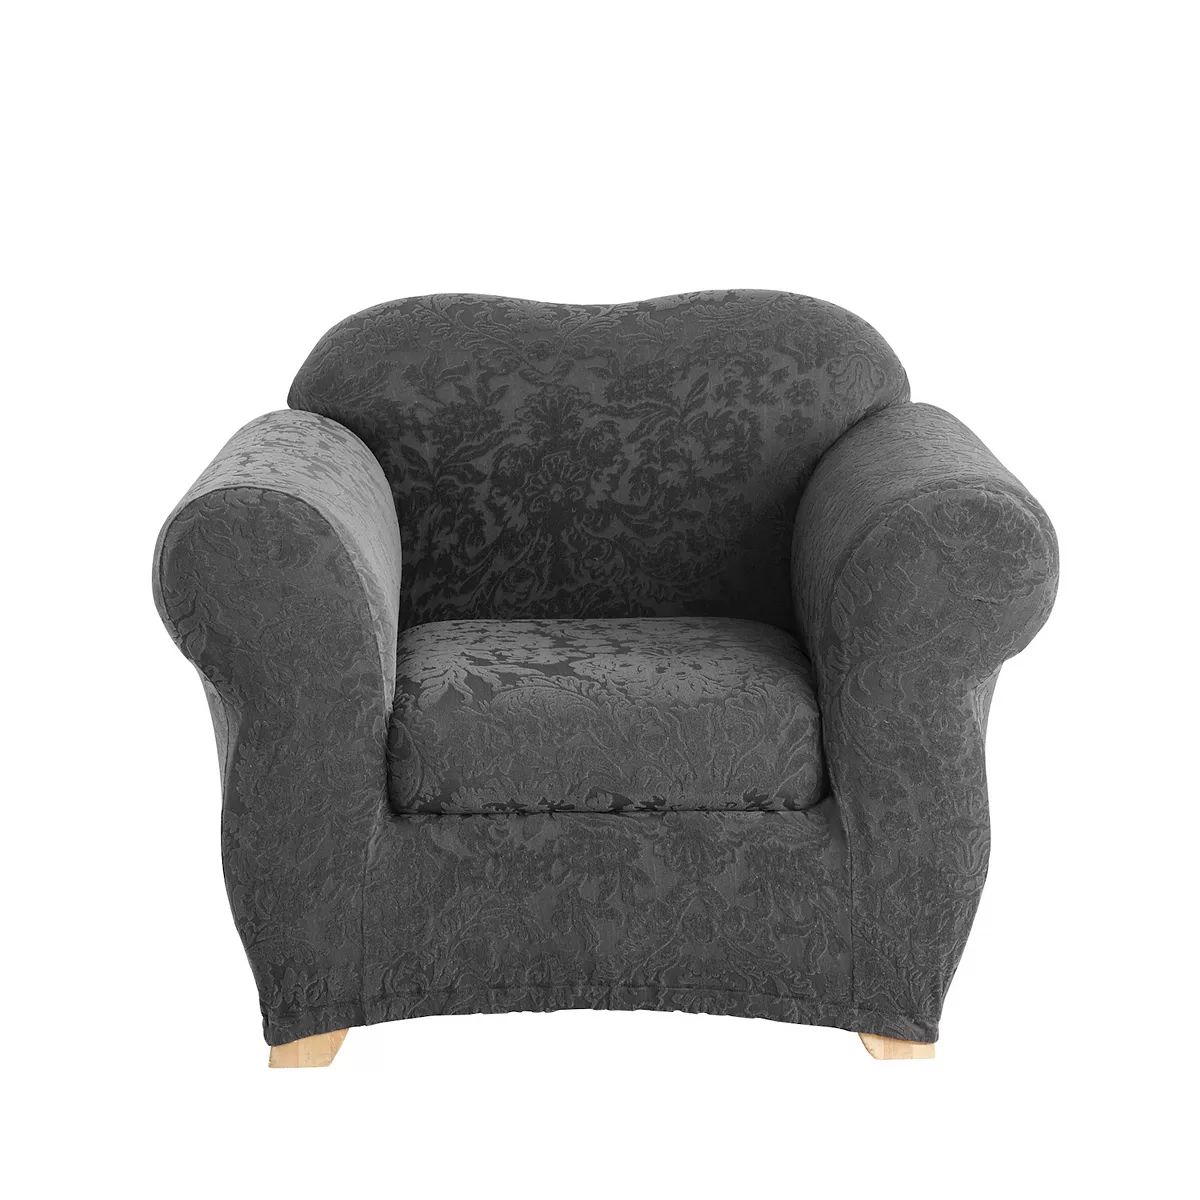 Sure Fit Stretch Jacquard Damask Chair Slipcover | Kohl's